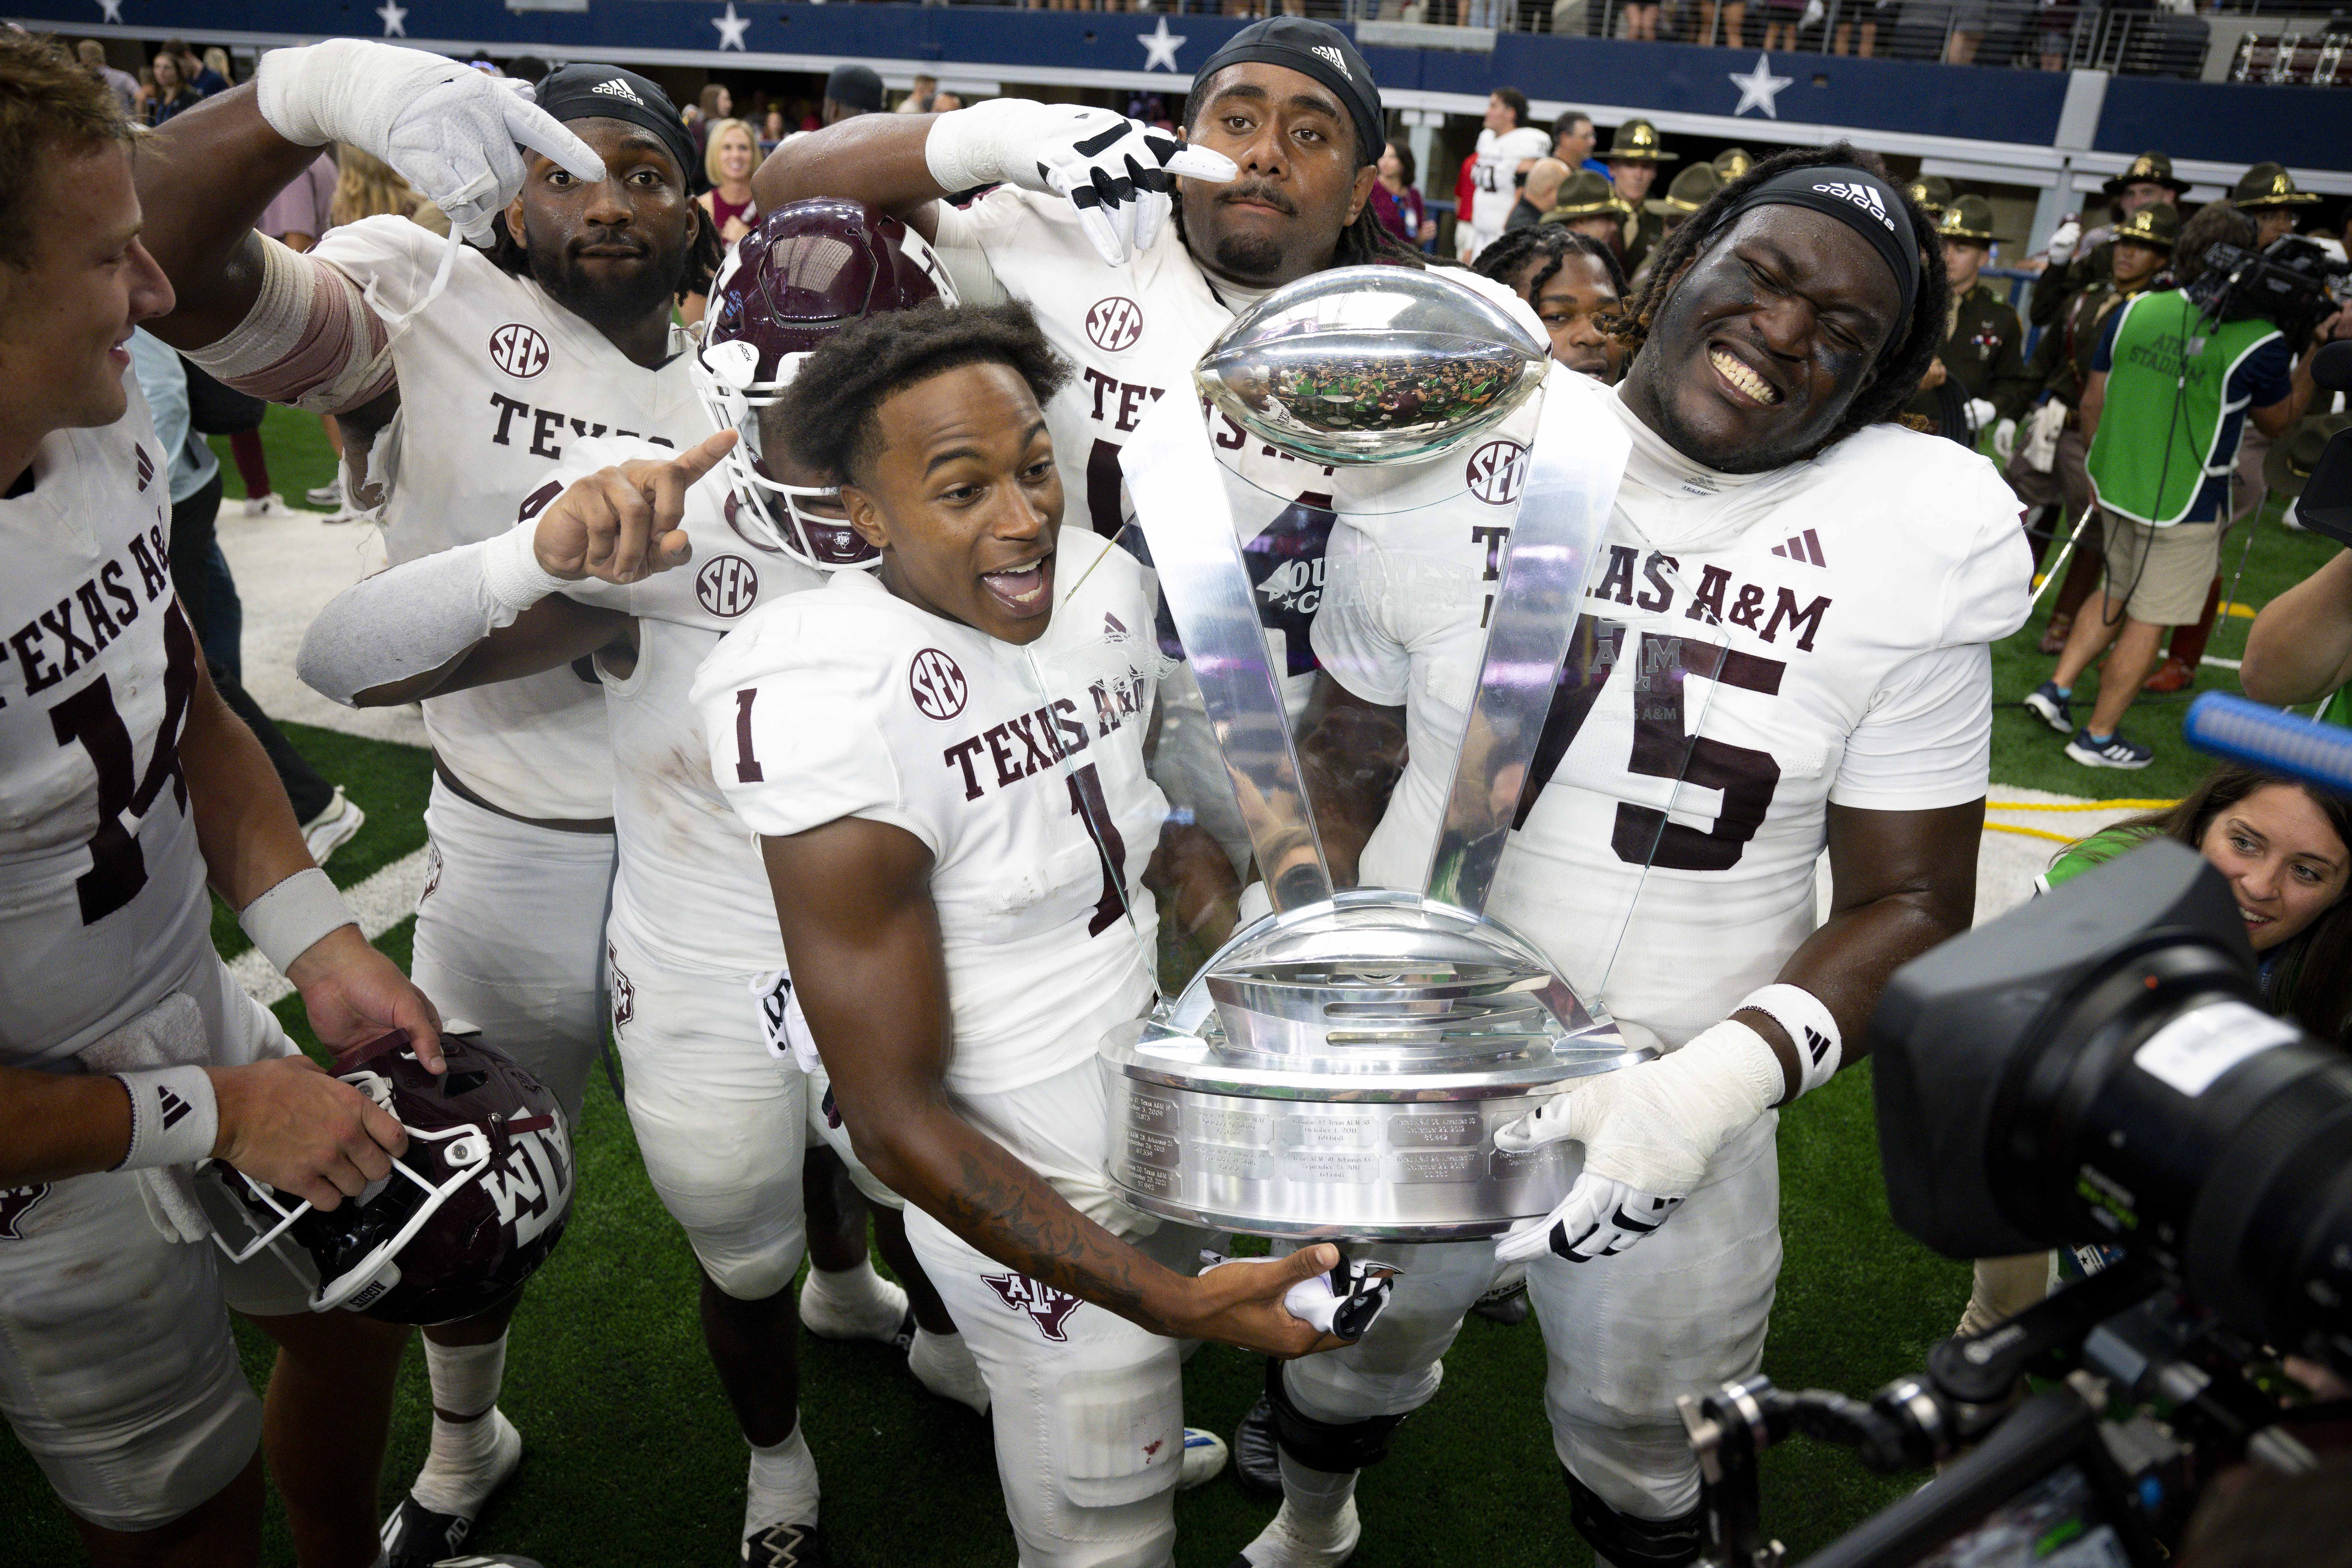 Texas A&M sophomore left guard Kam Dewberry has ‘successful surgery’